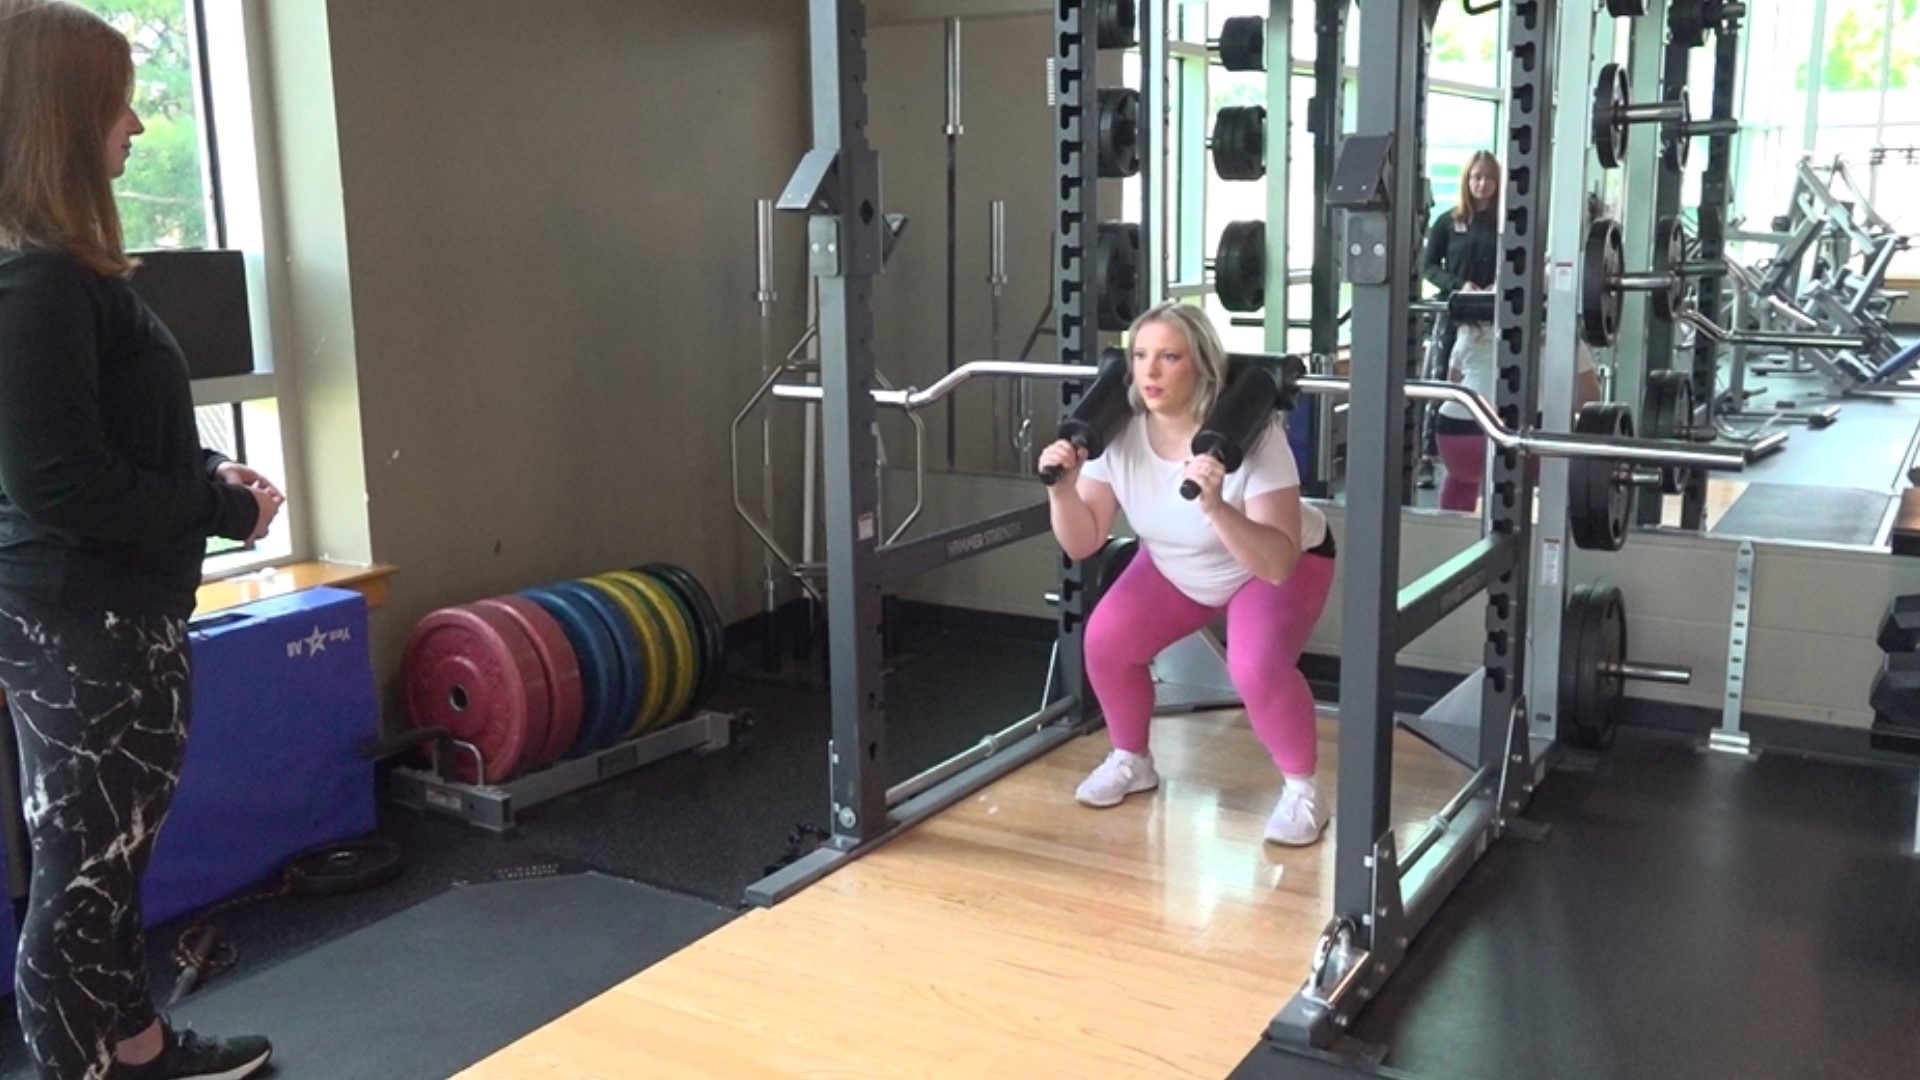 The safety bar can be used for several moves, and can be a major asset in the gym. The York JCC teaches how to use it in this week's FitMinute!